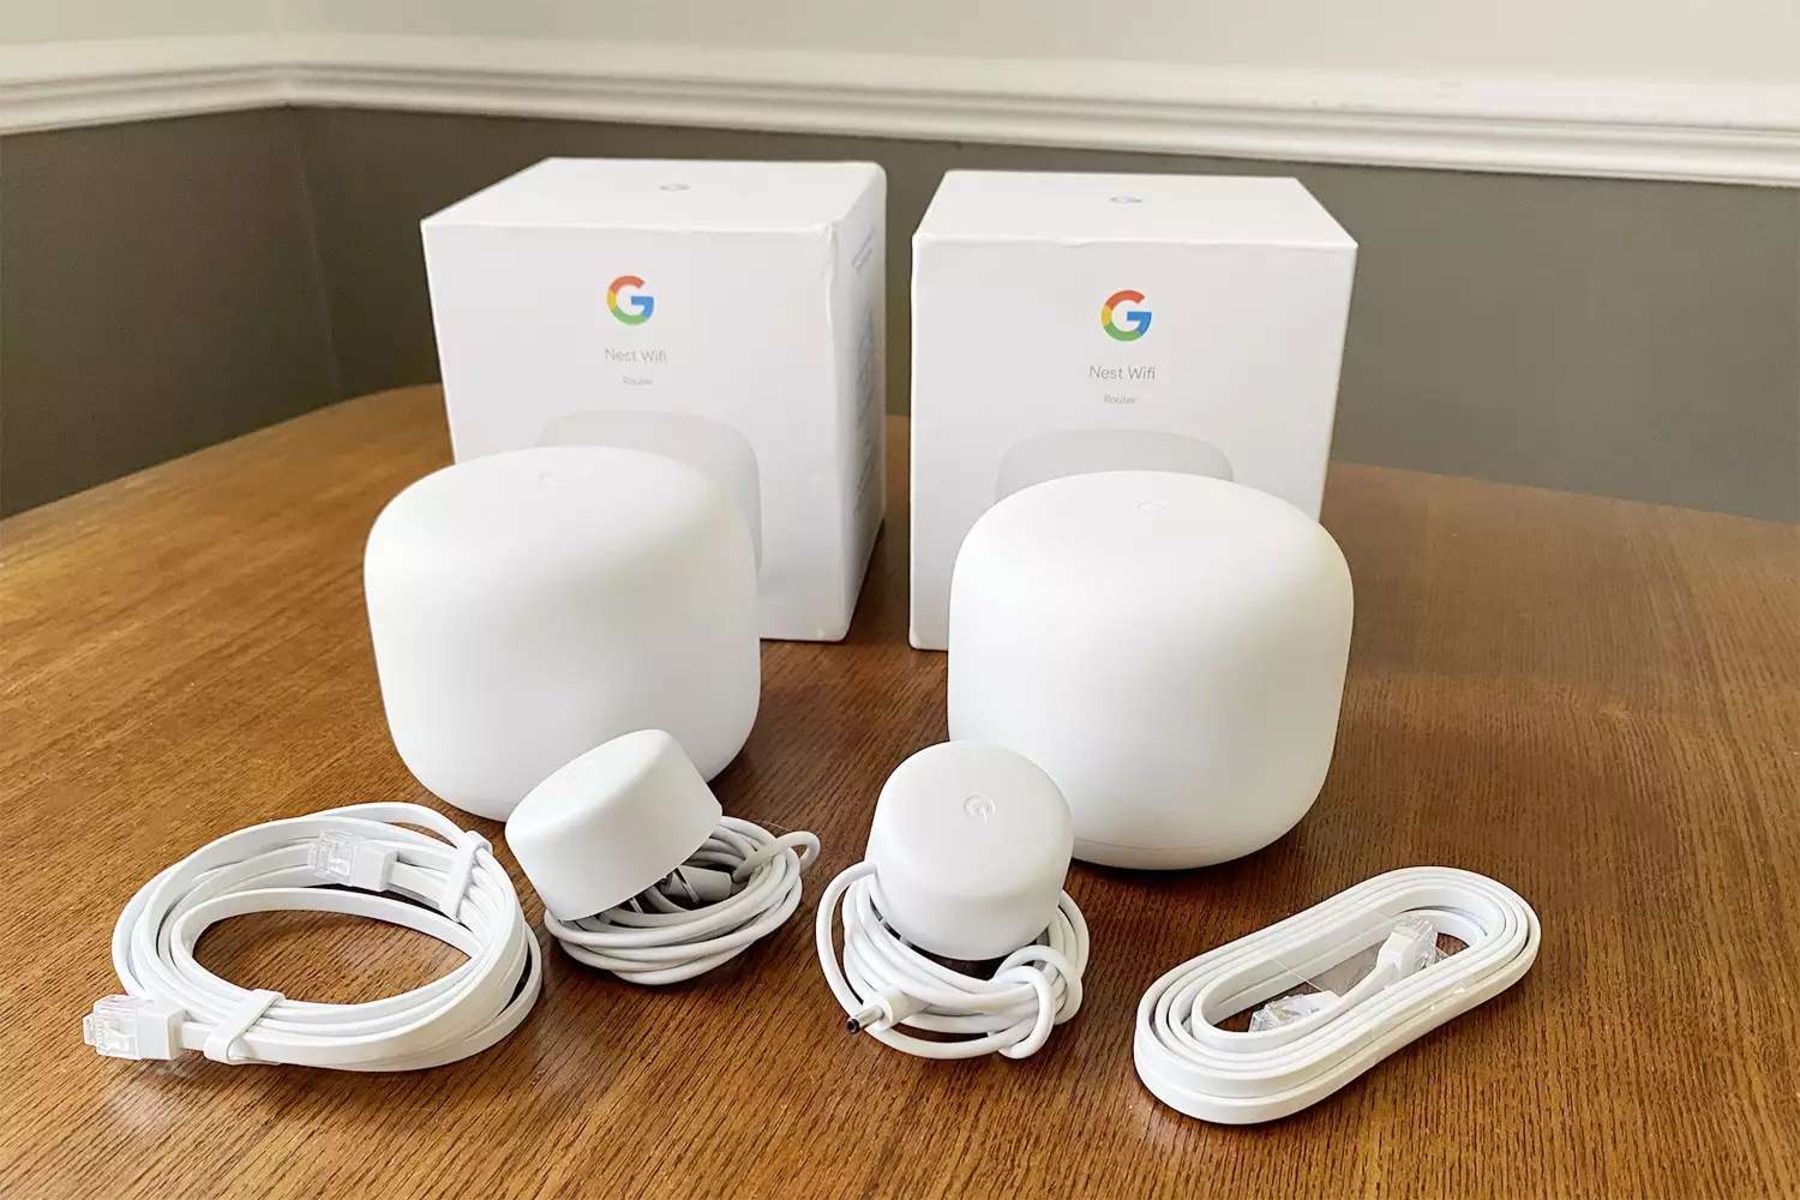 13 Best Google WiFi Router for 2023